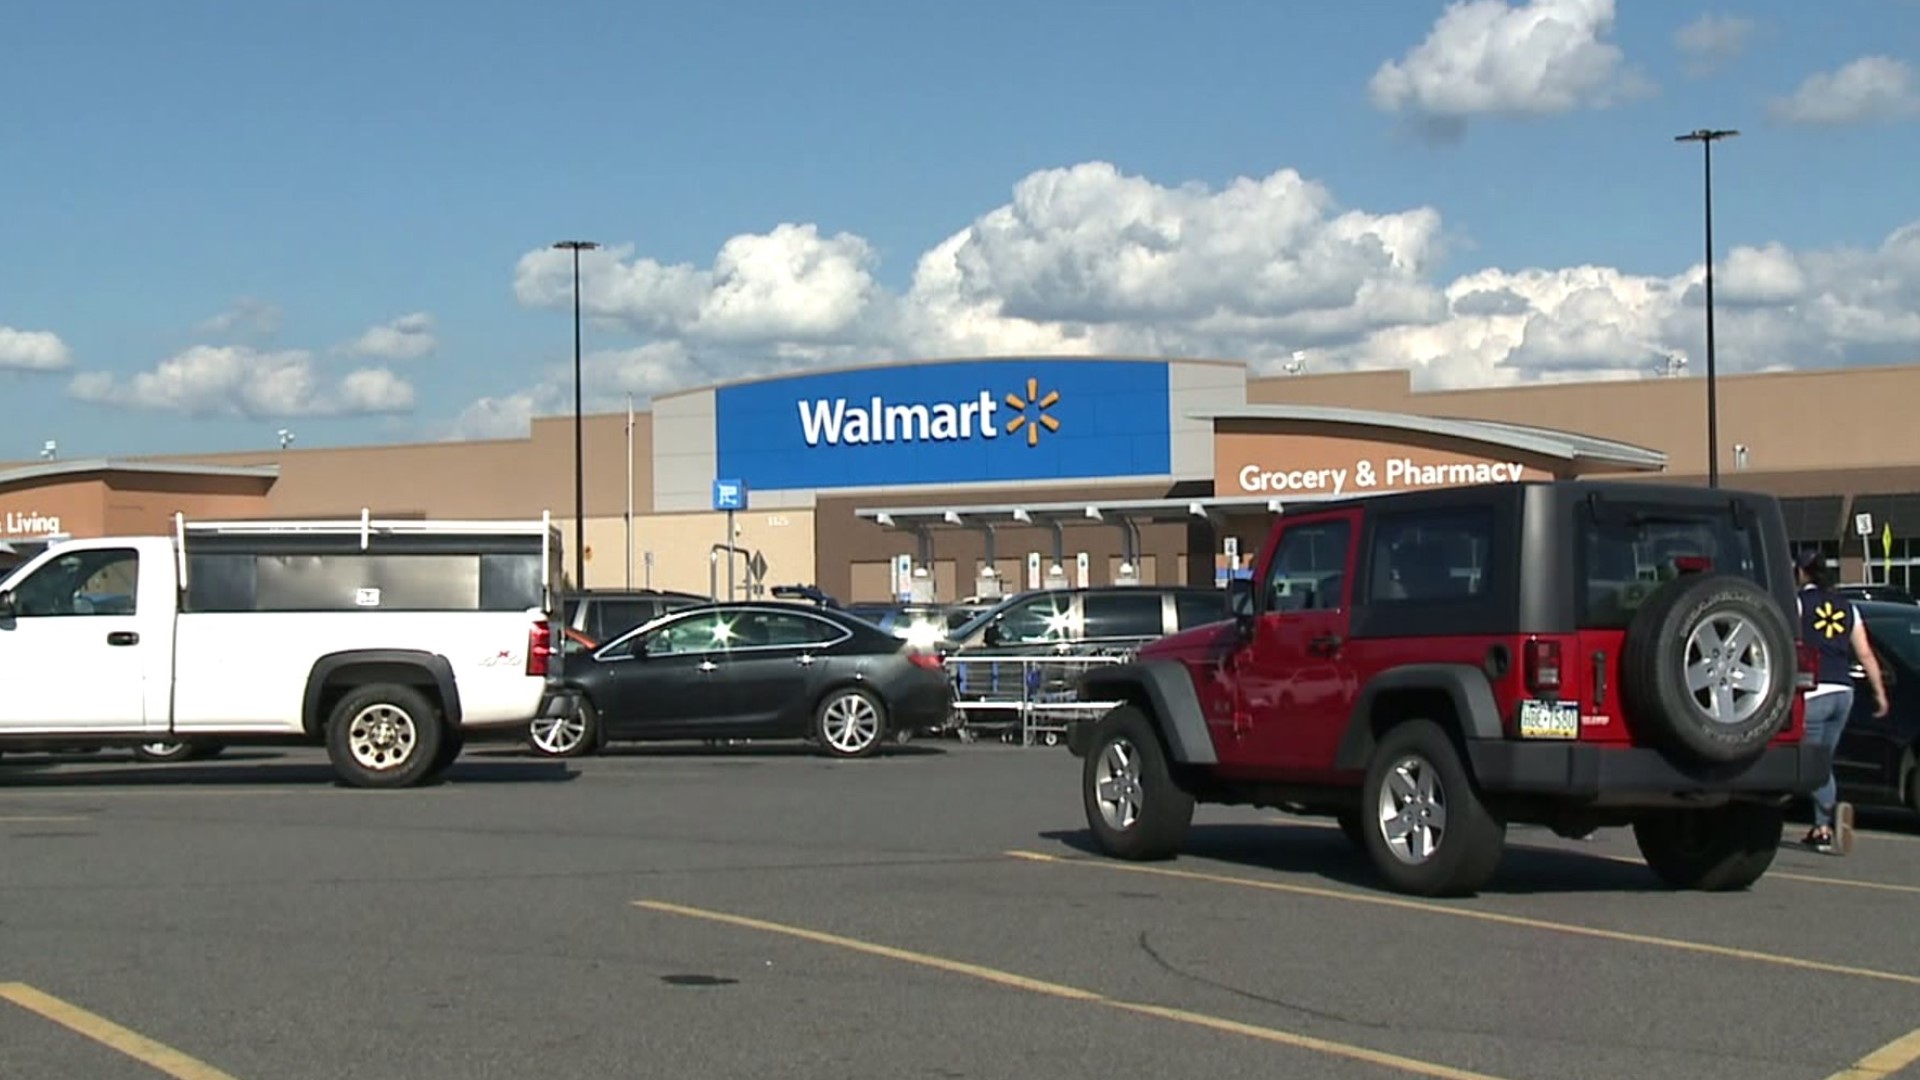 Walmart Customers React to News the Giant Retailer Will Stop Selling Handgun Ammunition and Other Safety Changes